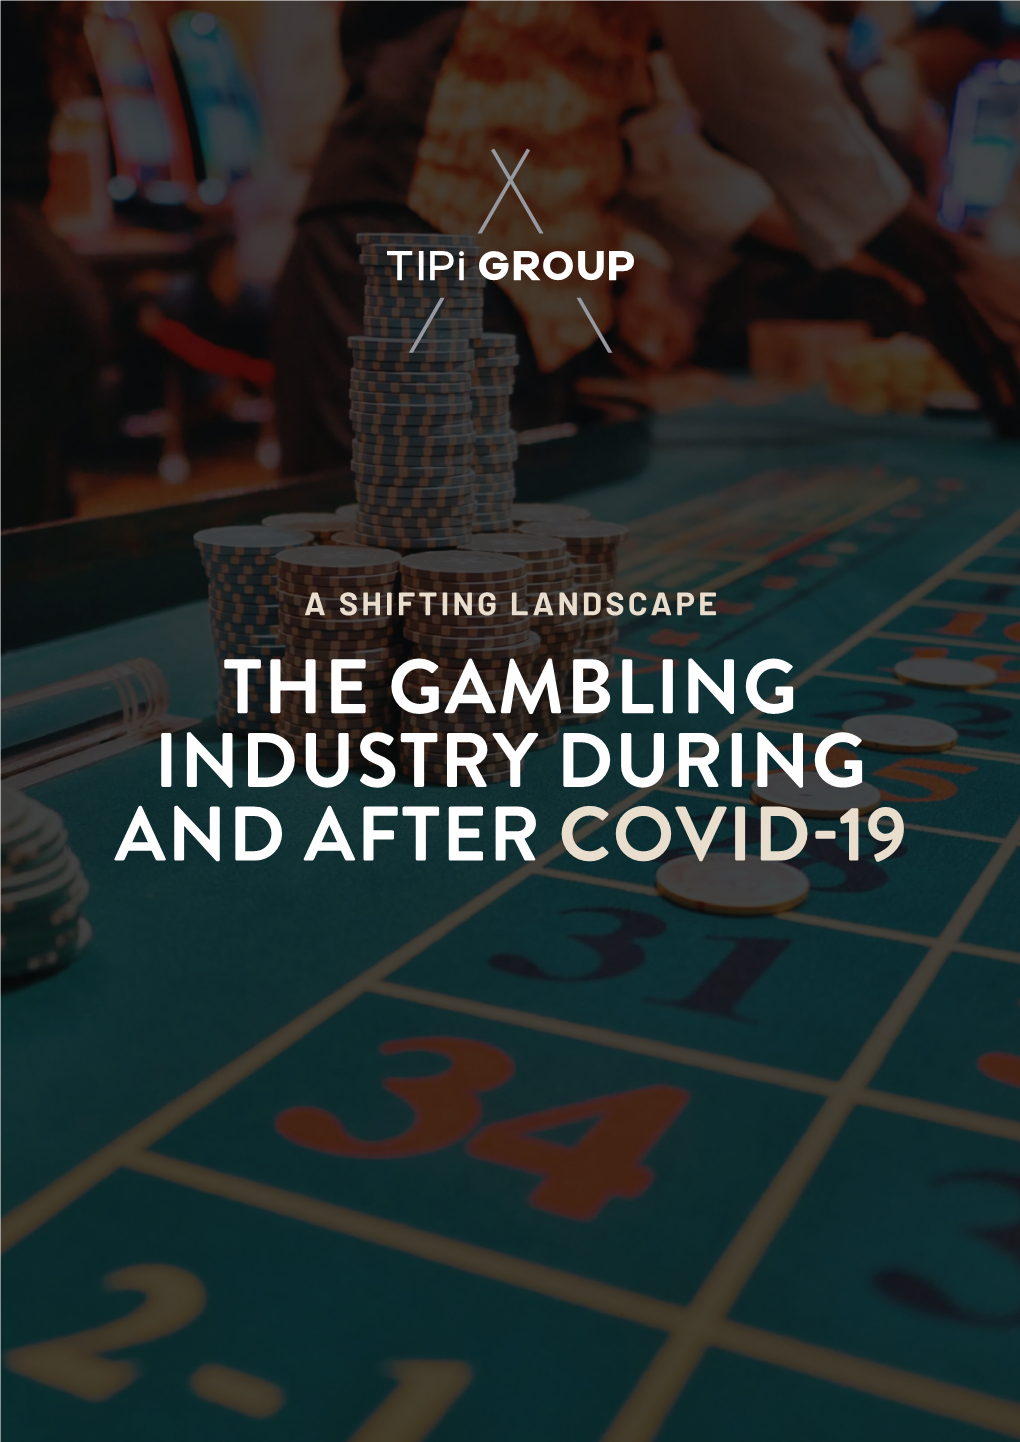 The Gambling Industry During and After Covid-19 Contents